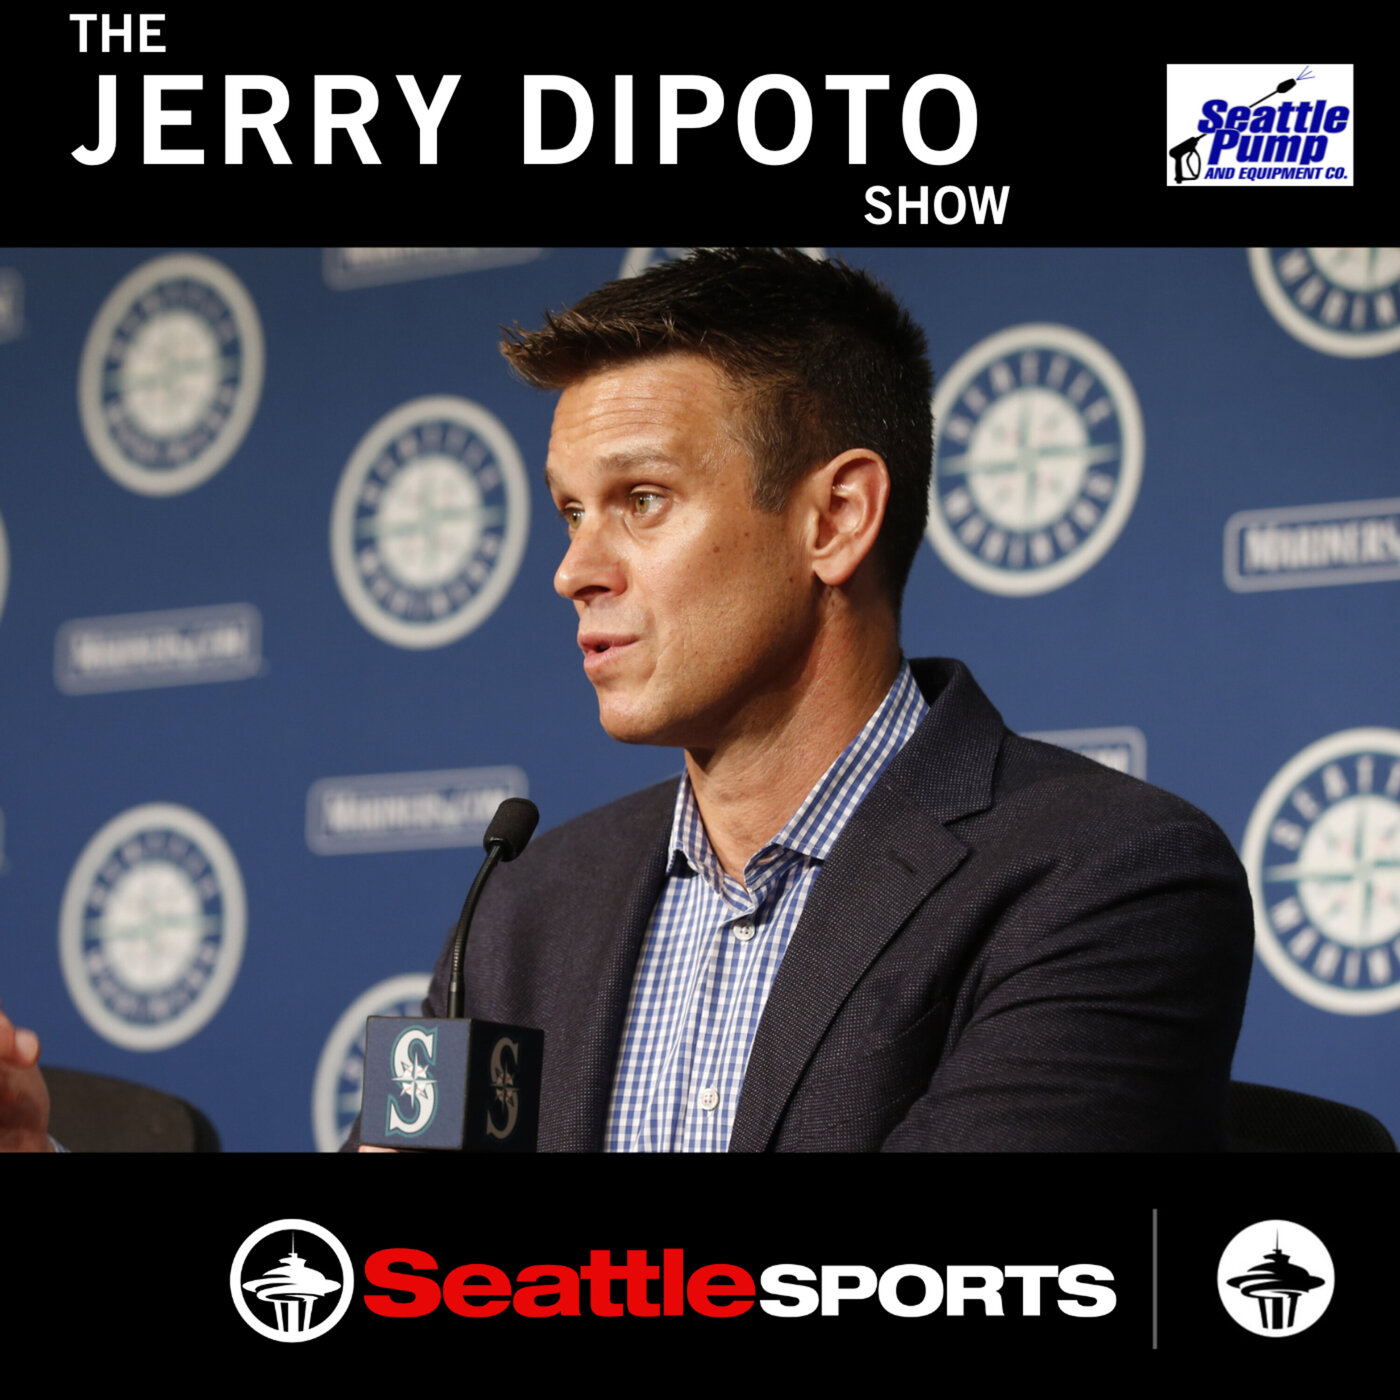 Jerry Dipoto-"I completely whiffed to paint a big picture baseline."